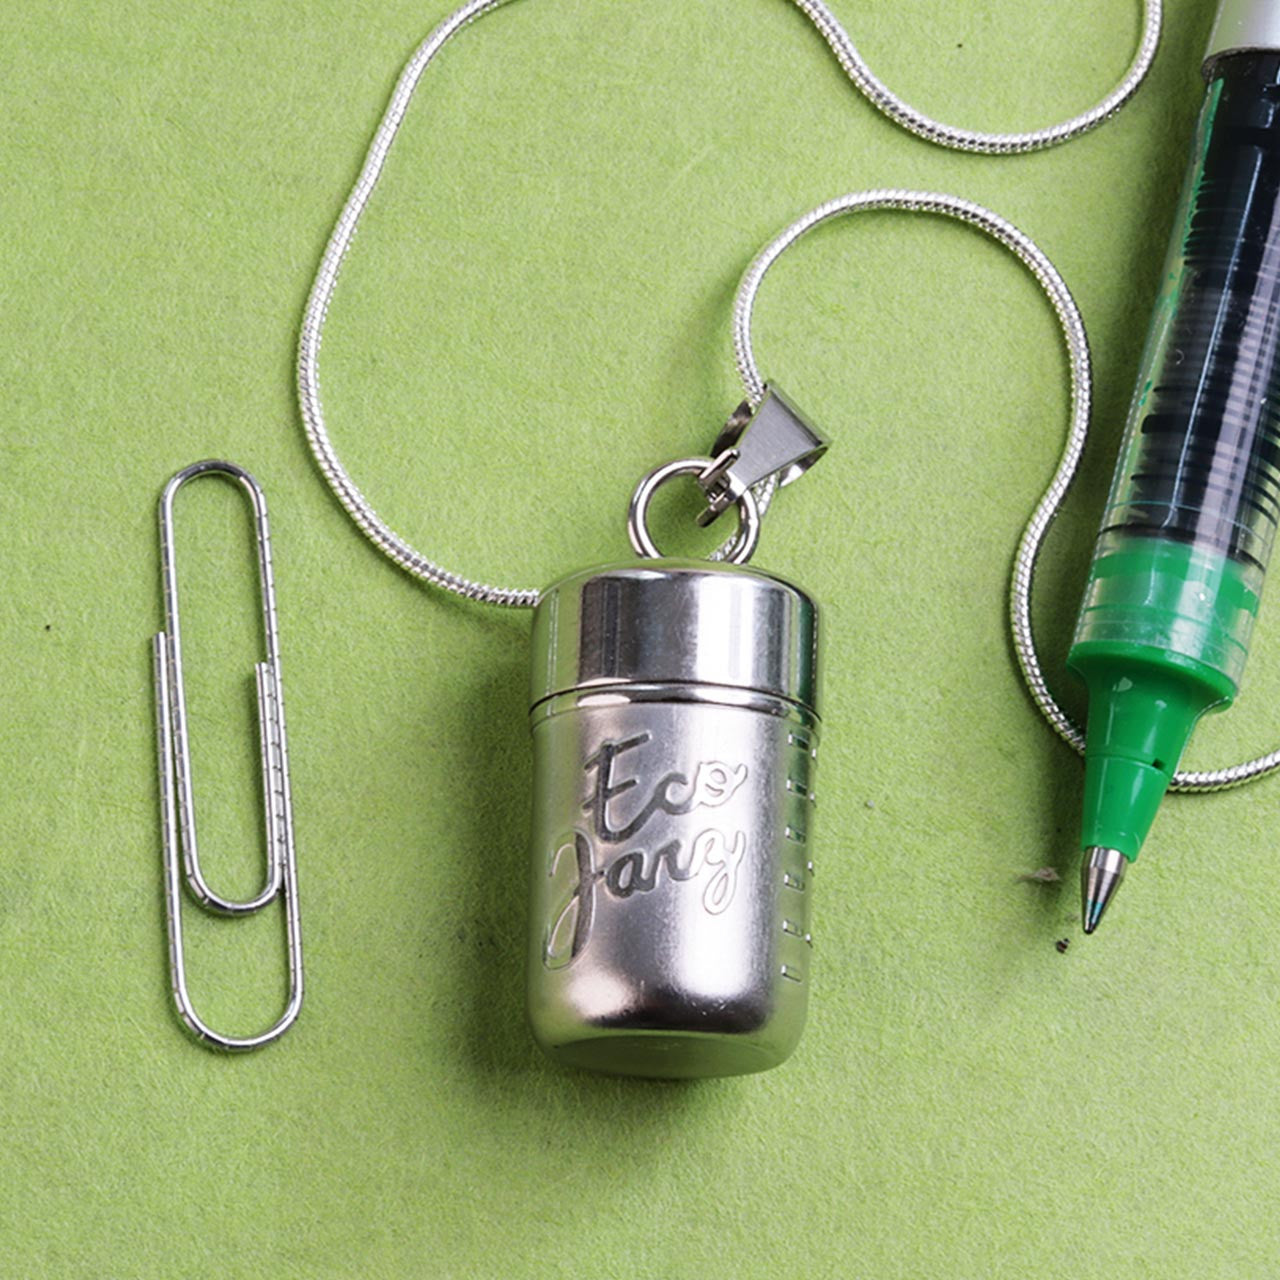 Stainless Steel Mason Jar Locket Necklace laying next to a paper clip and a pen for size comparison.